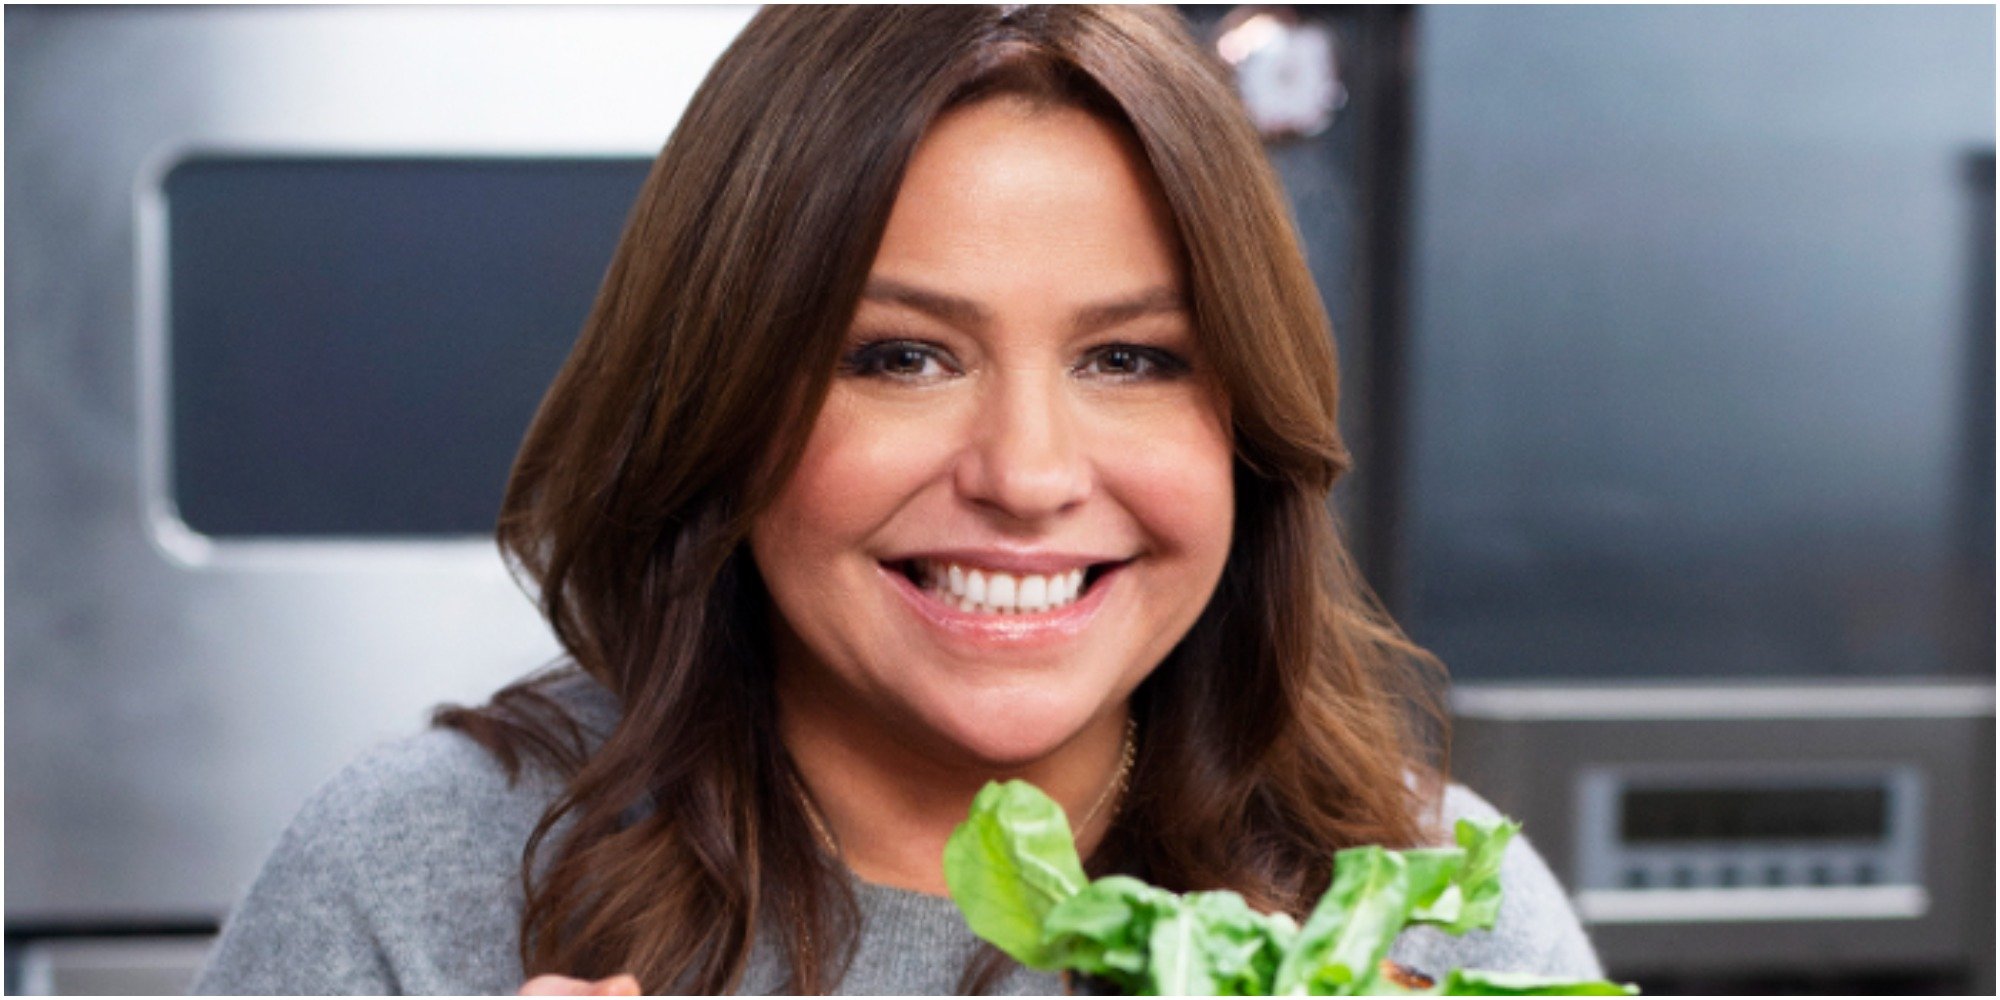 Rachael Ray poses for a photograph in a kitchen.